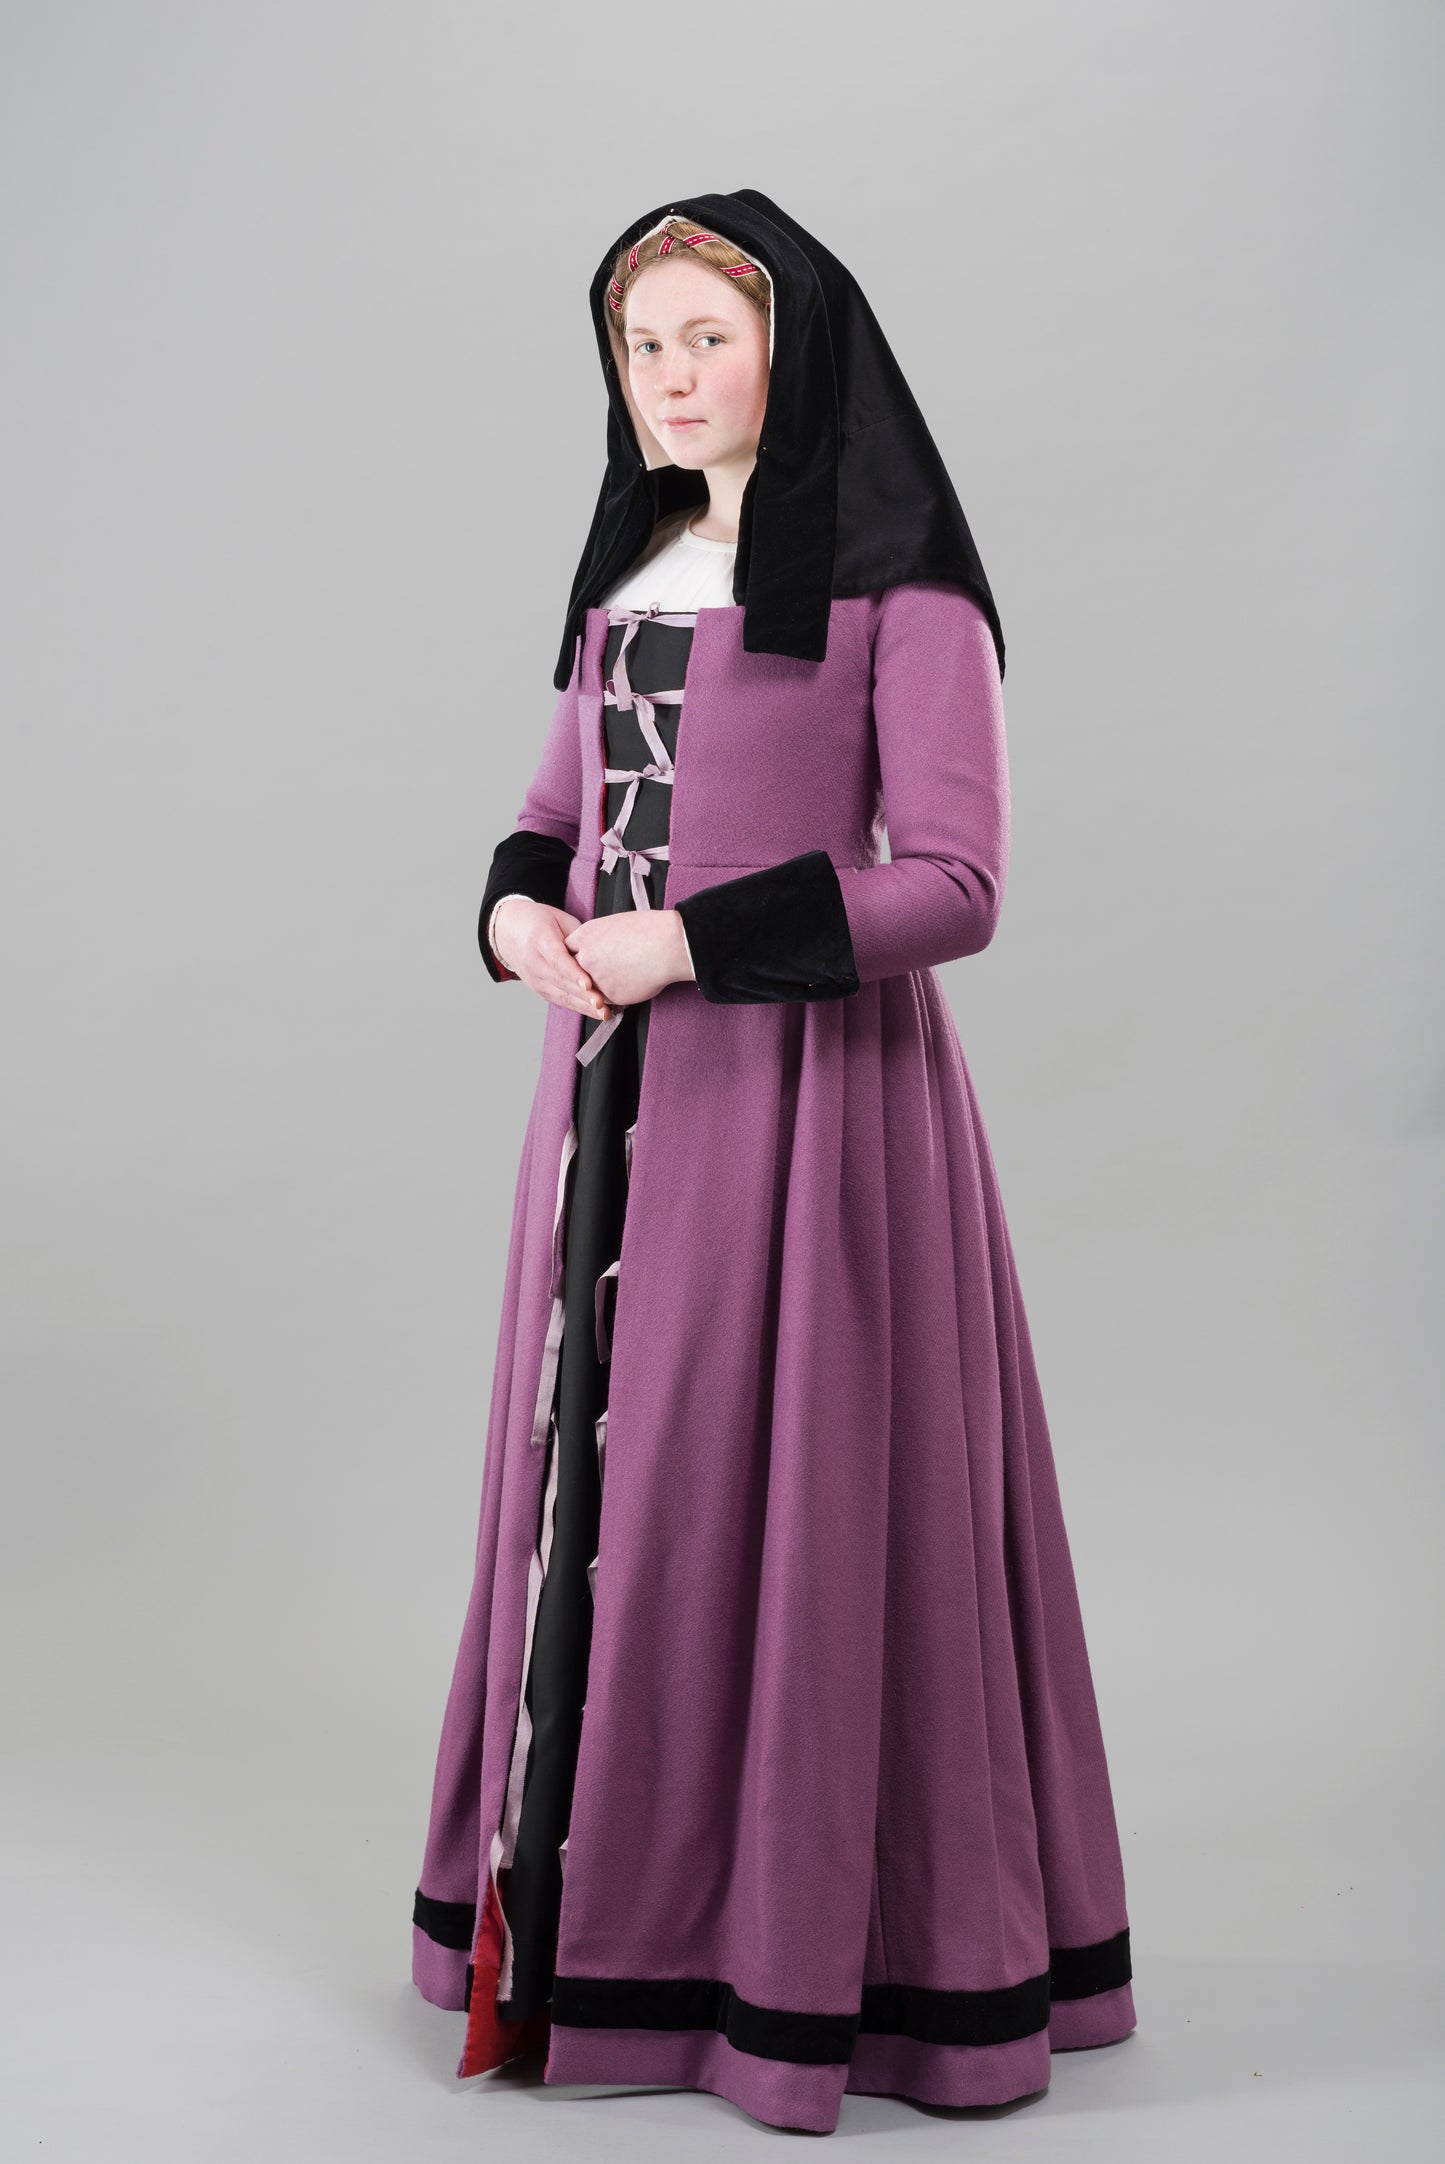 Pattern for Tudor woman's round gown with variations, Tudor Tailor exclusive